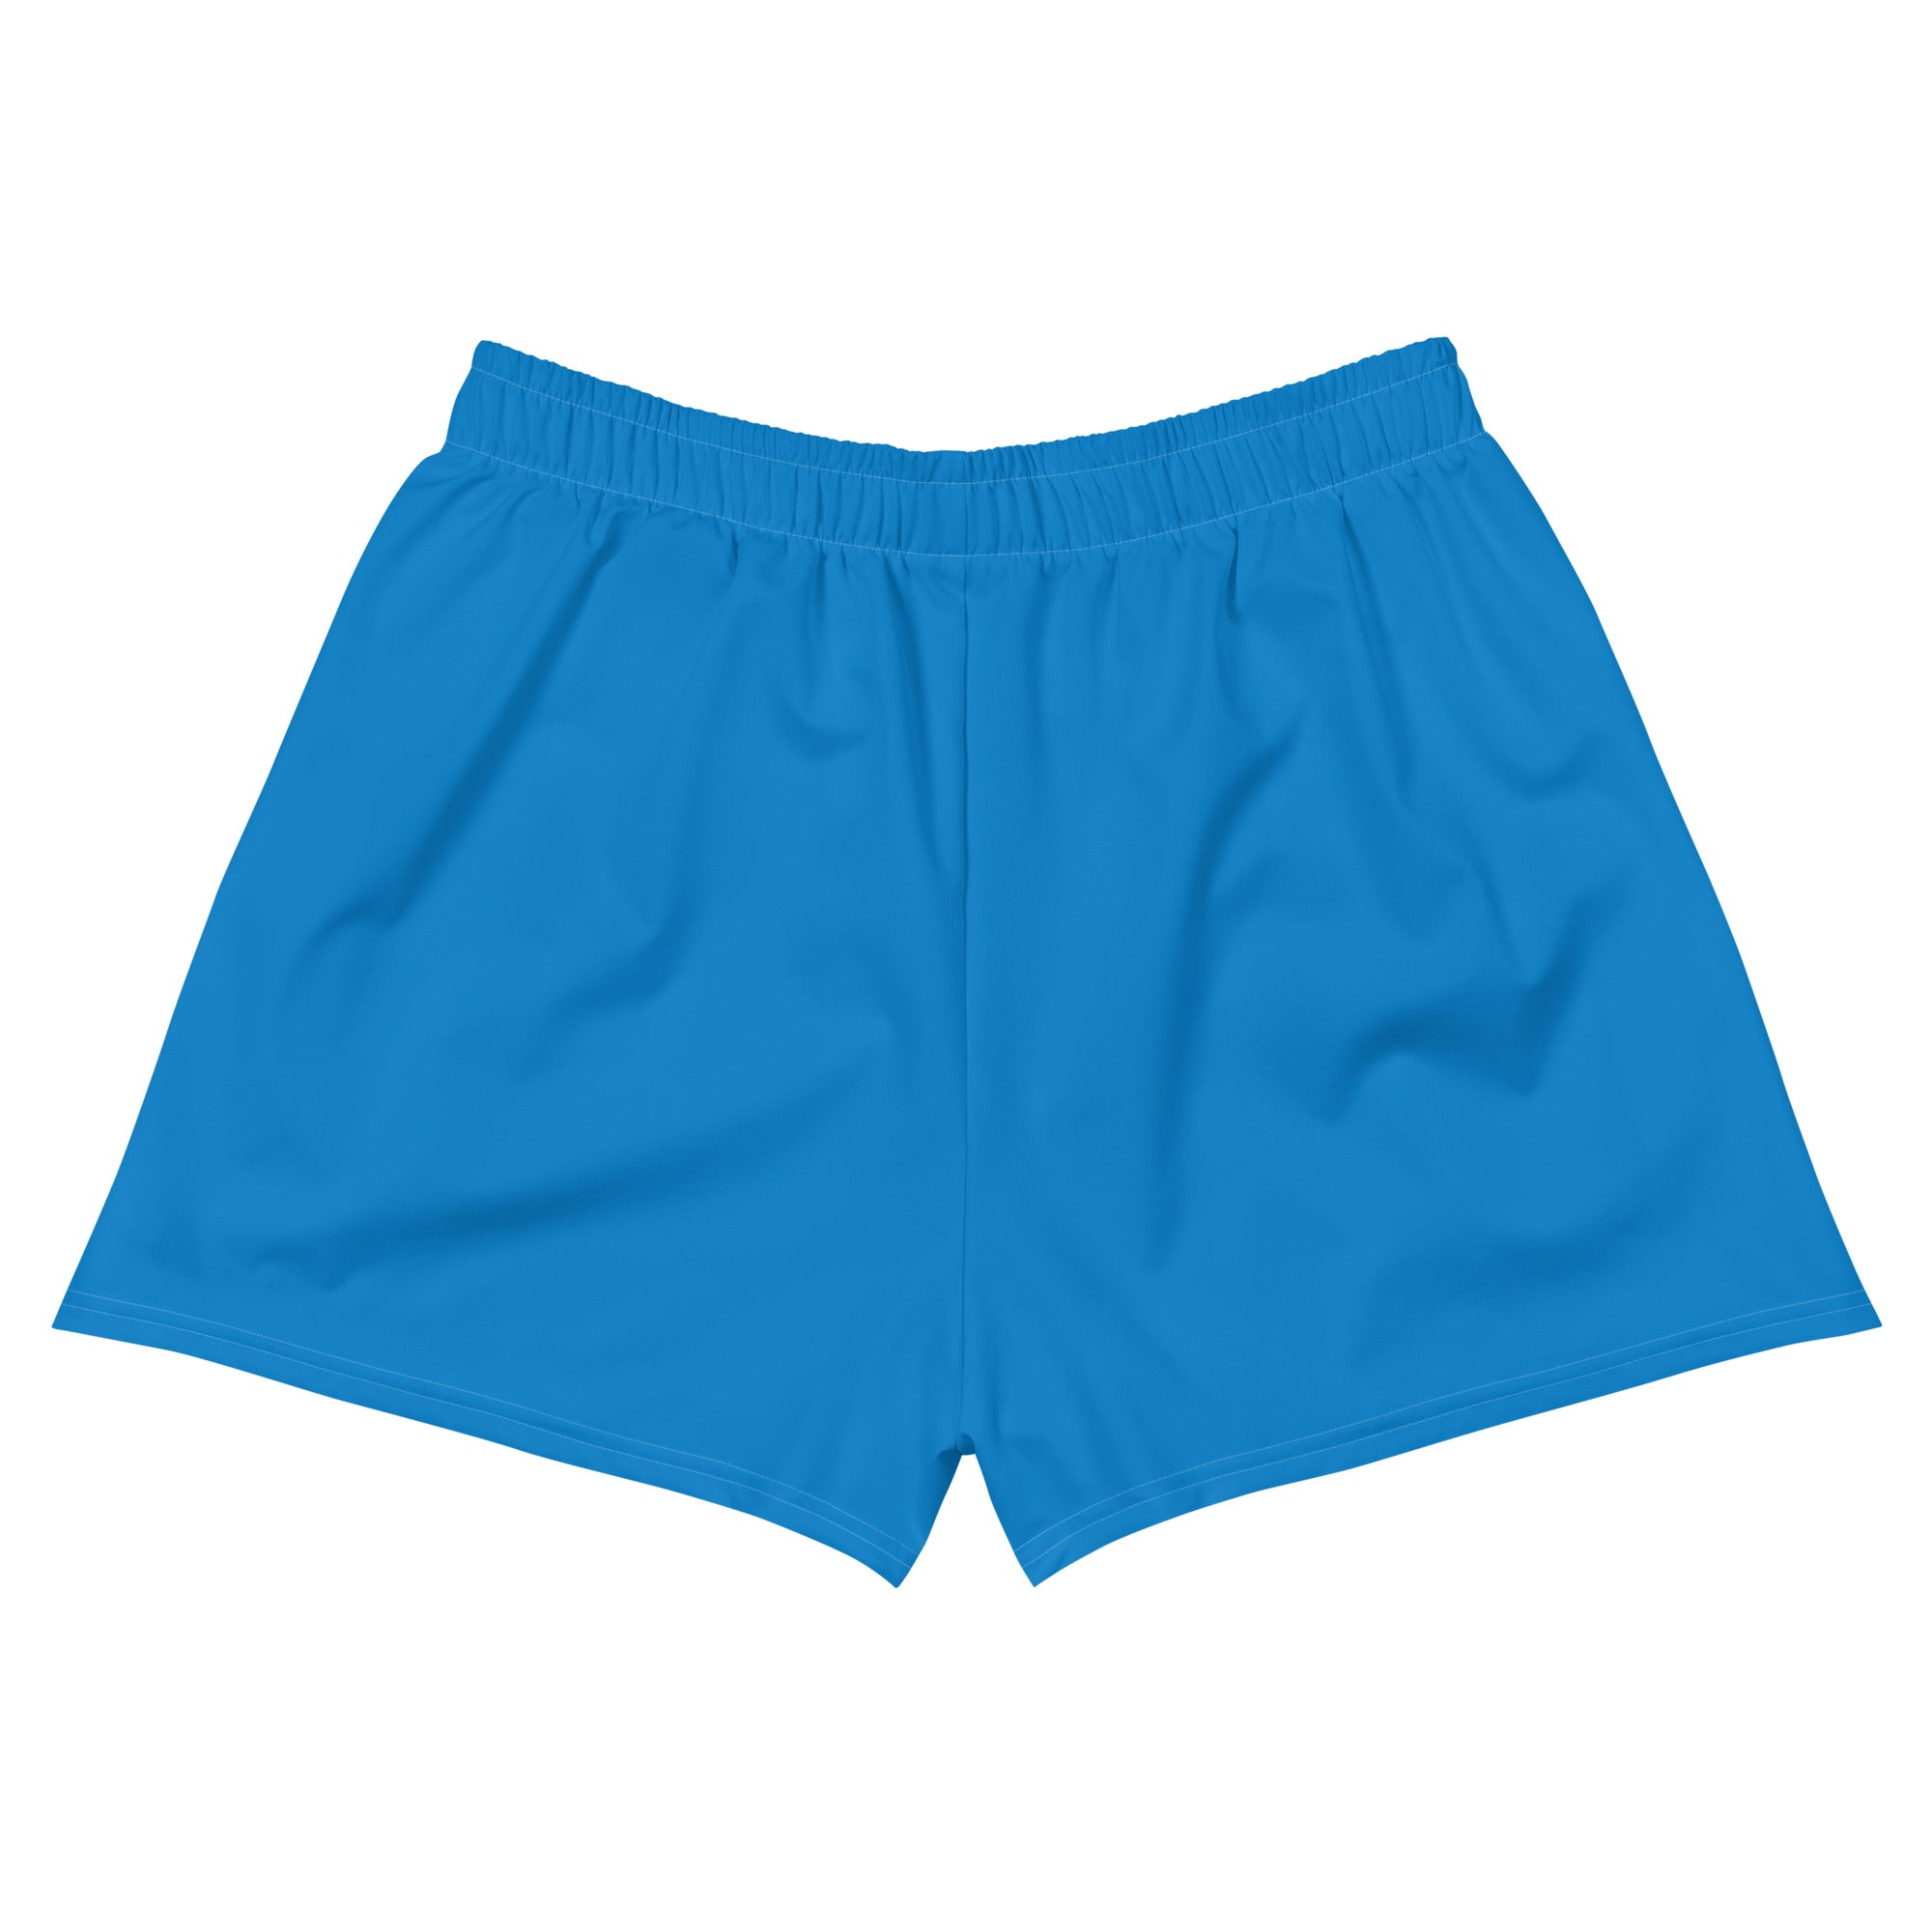 Rollins Women’s Athletic Shorts